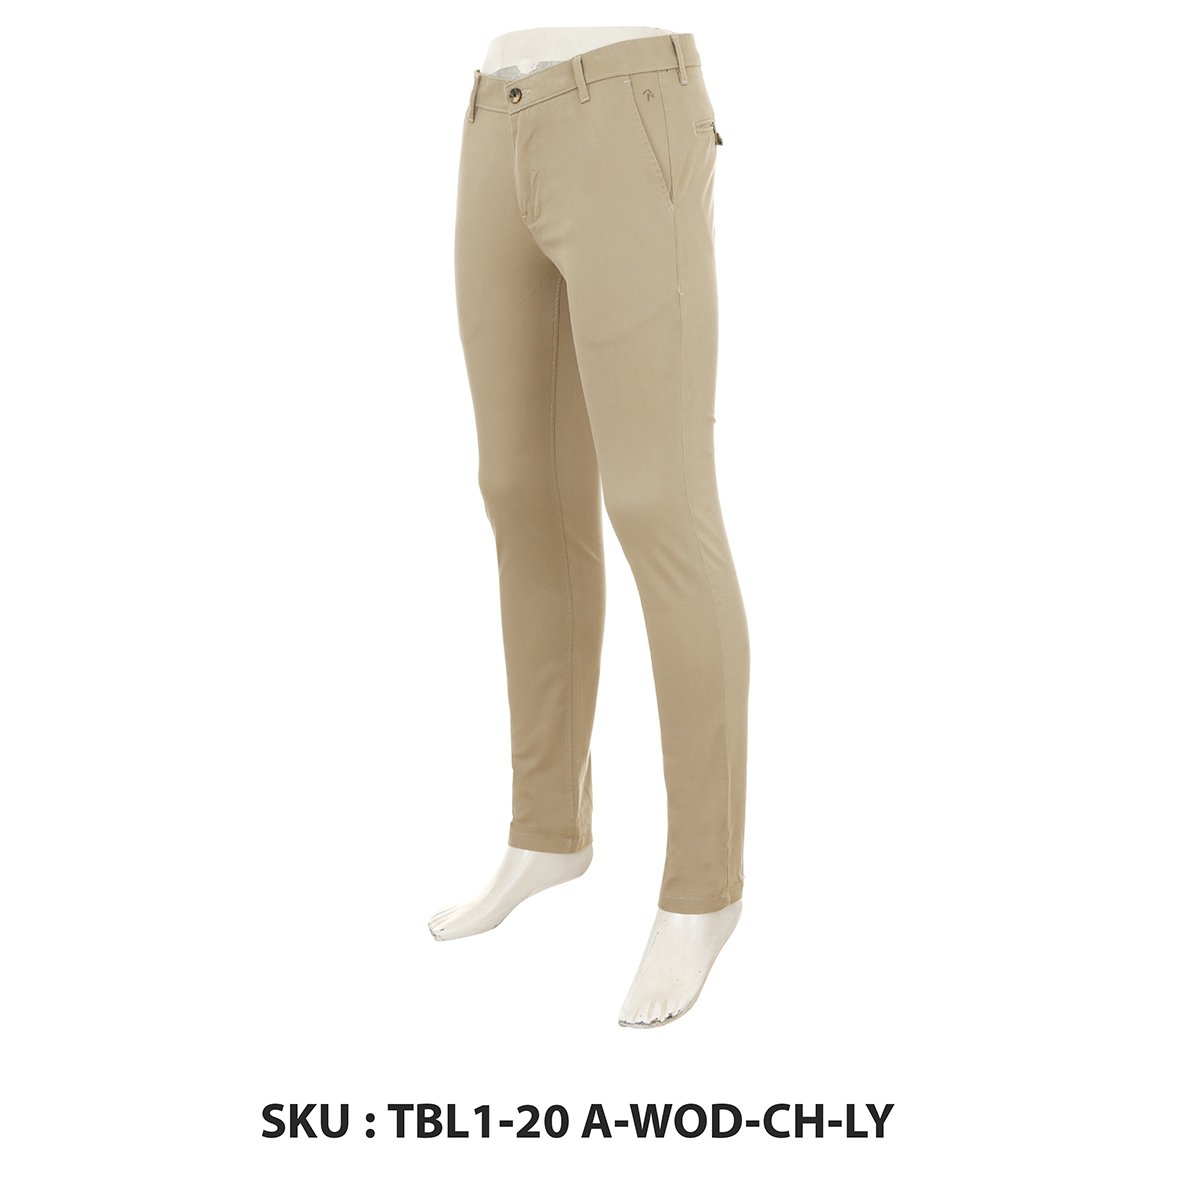 Classic Polo Mens Trousers Tbl1-20 A-Wod-Ch-Ly Wood 40